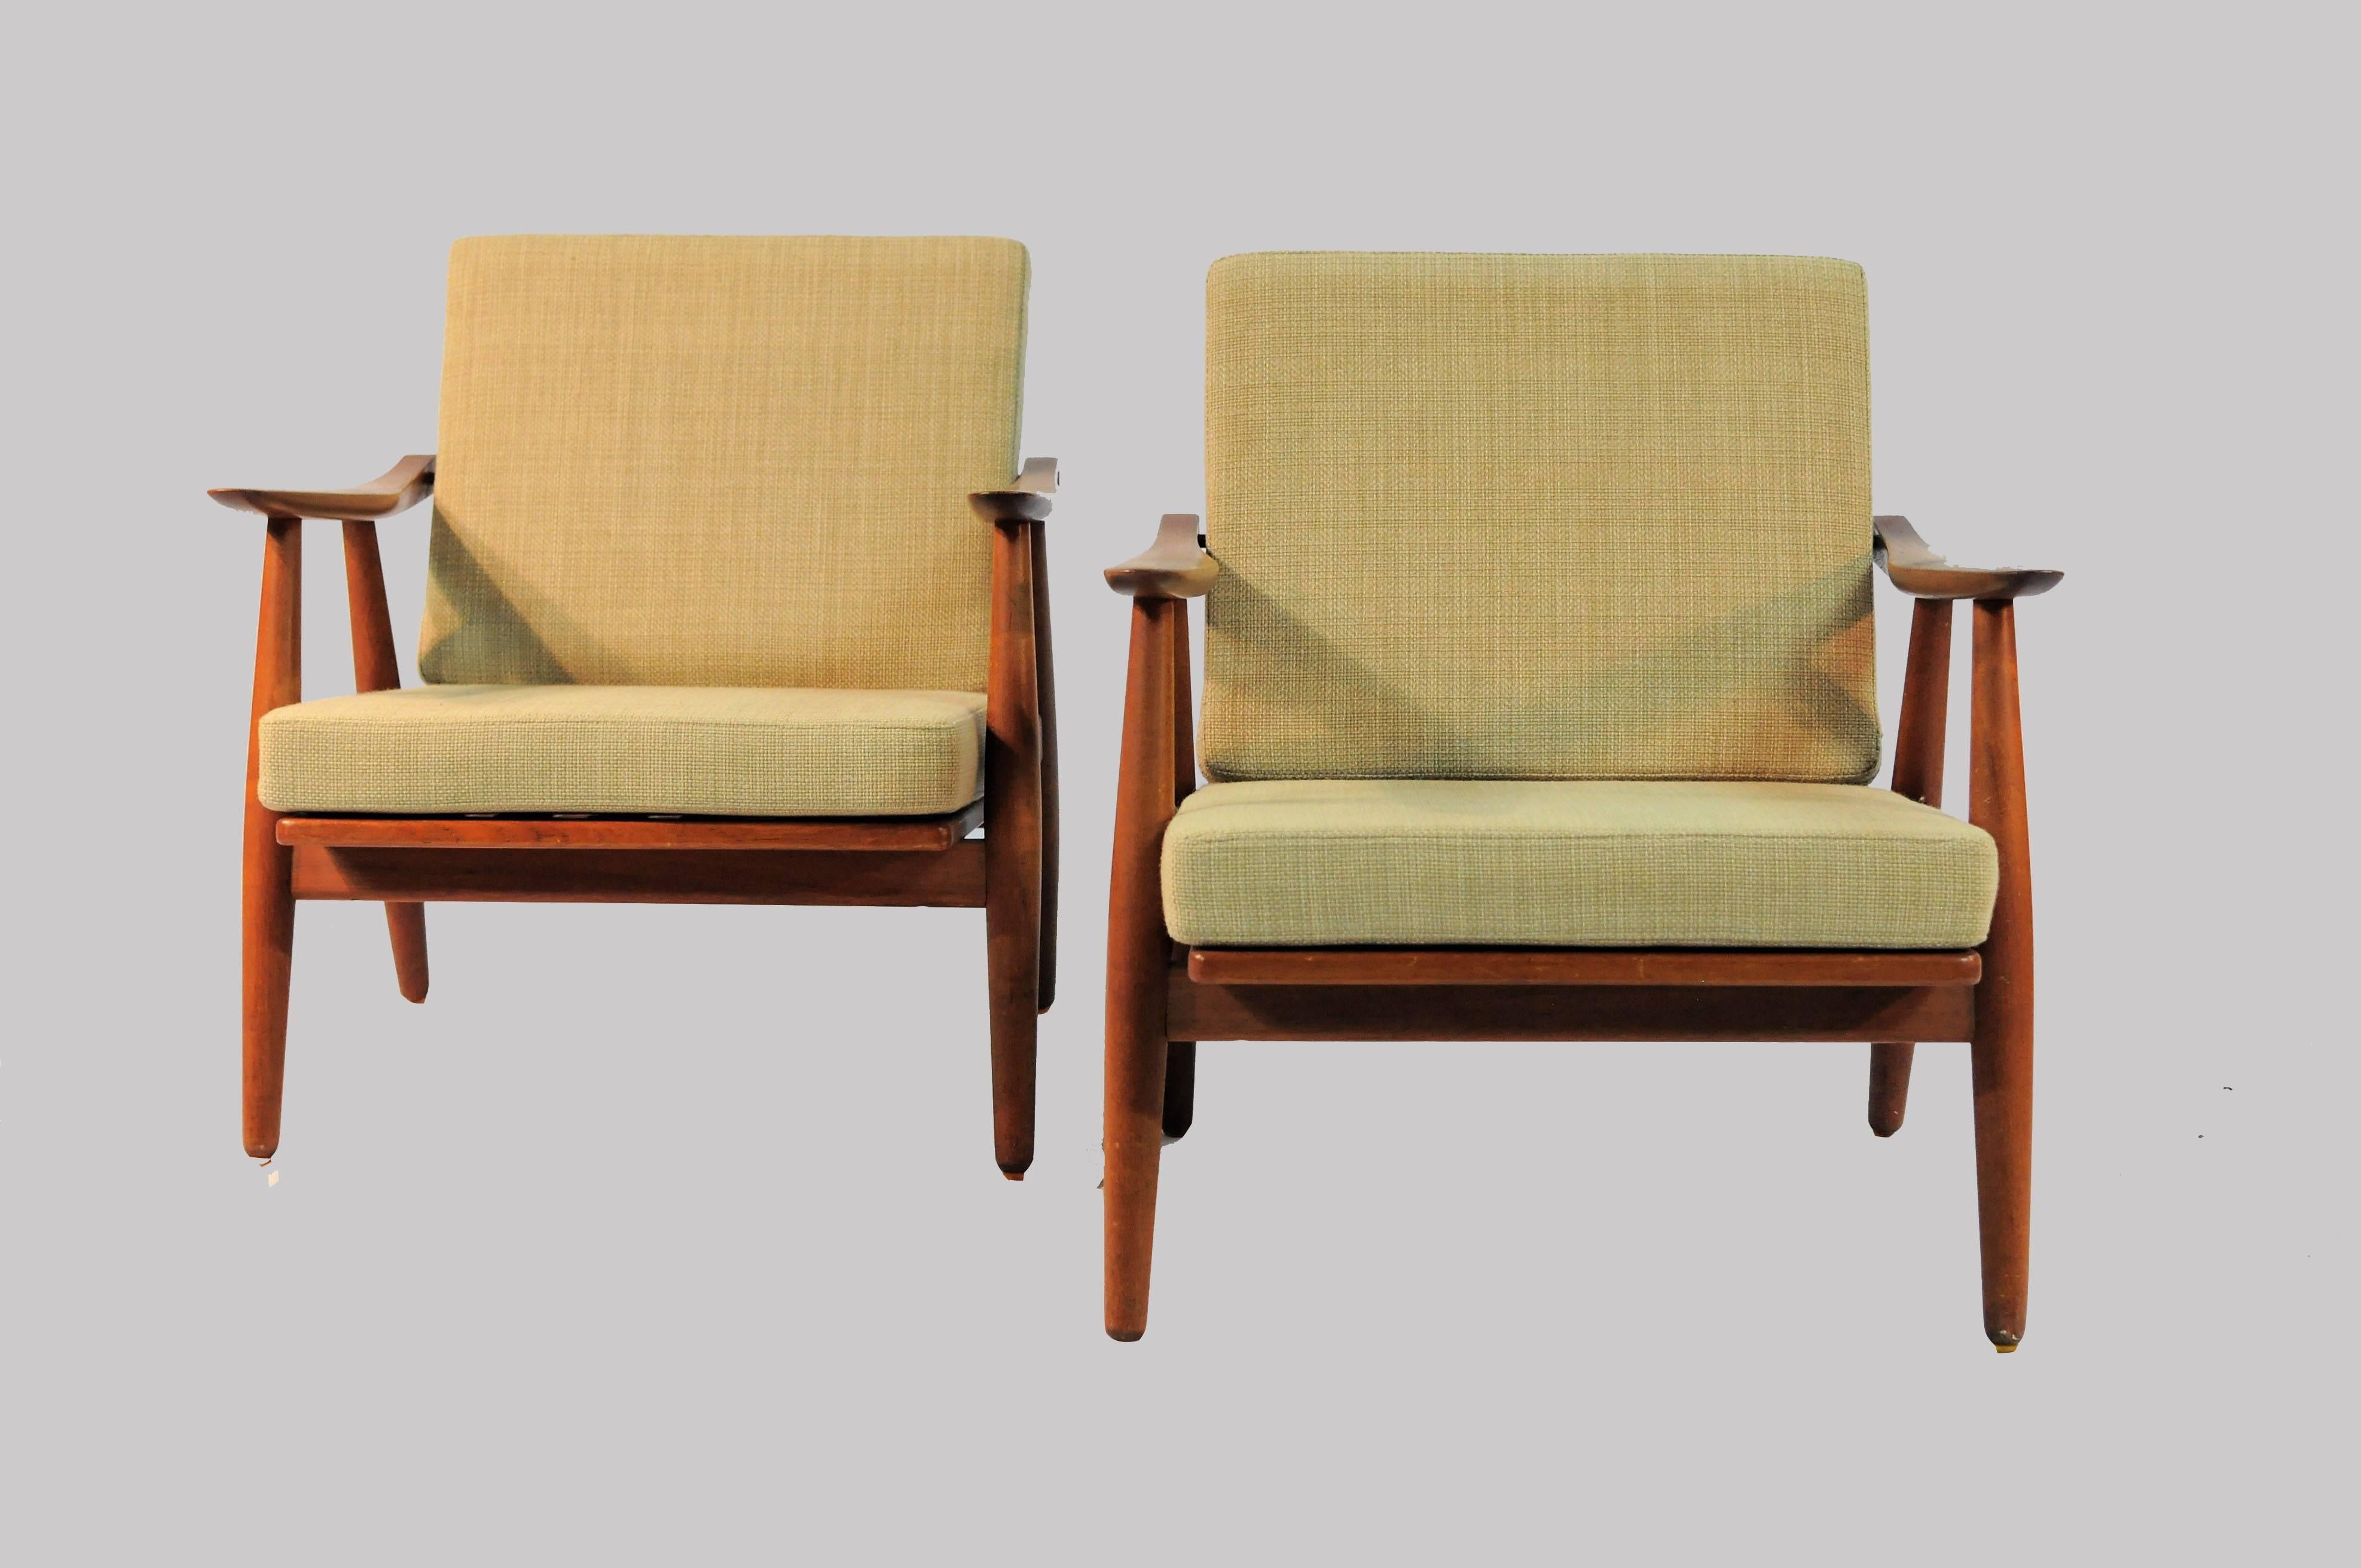 Set of two H.J. Wegner model 240 cigar lounge chairs in teak and fabric by GETAMA.

The lounge chairs feature a well designed and well crafted frame in solid oak with elegant curved armrests. The frame of the chairs have been overlooked and